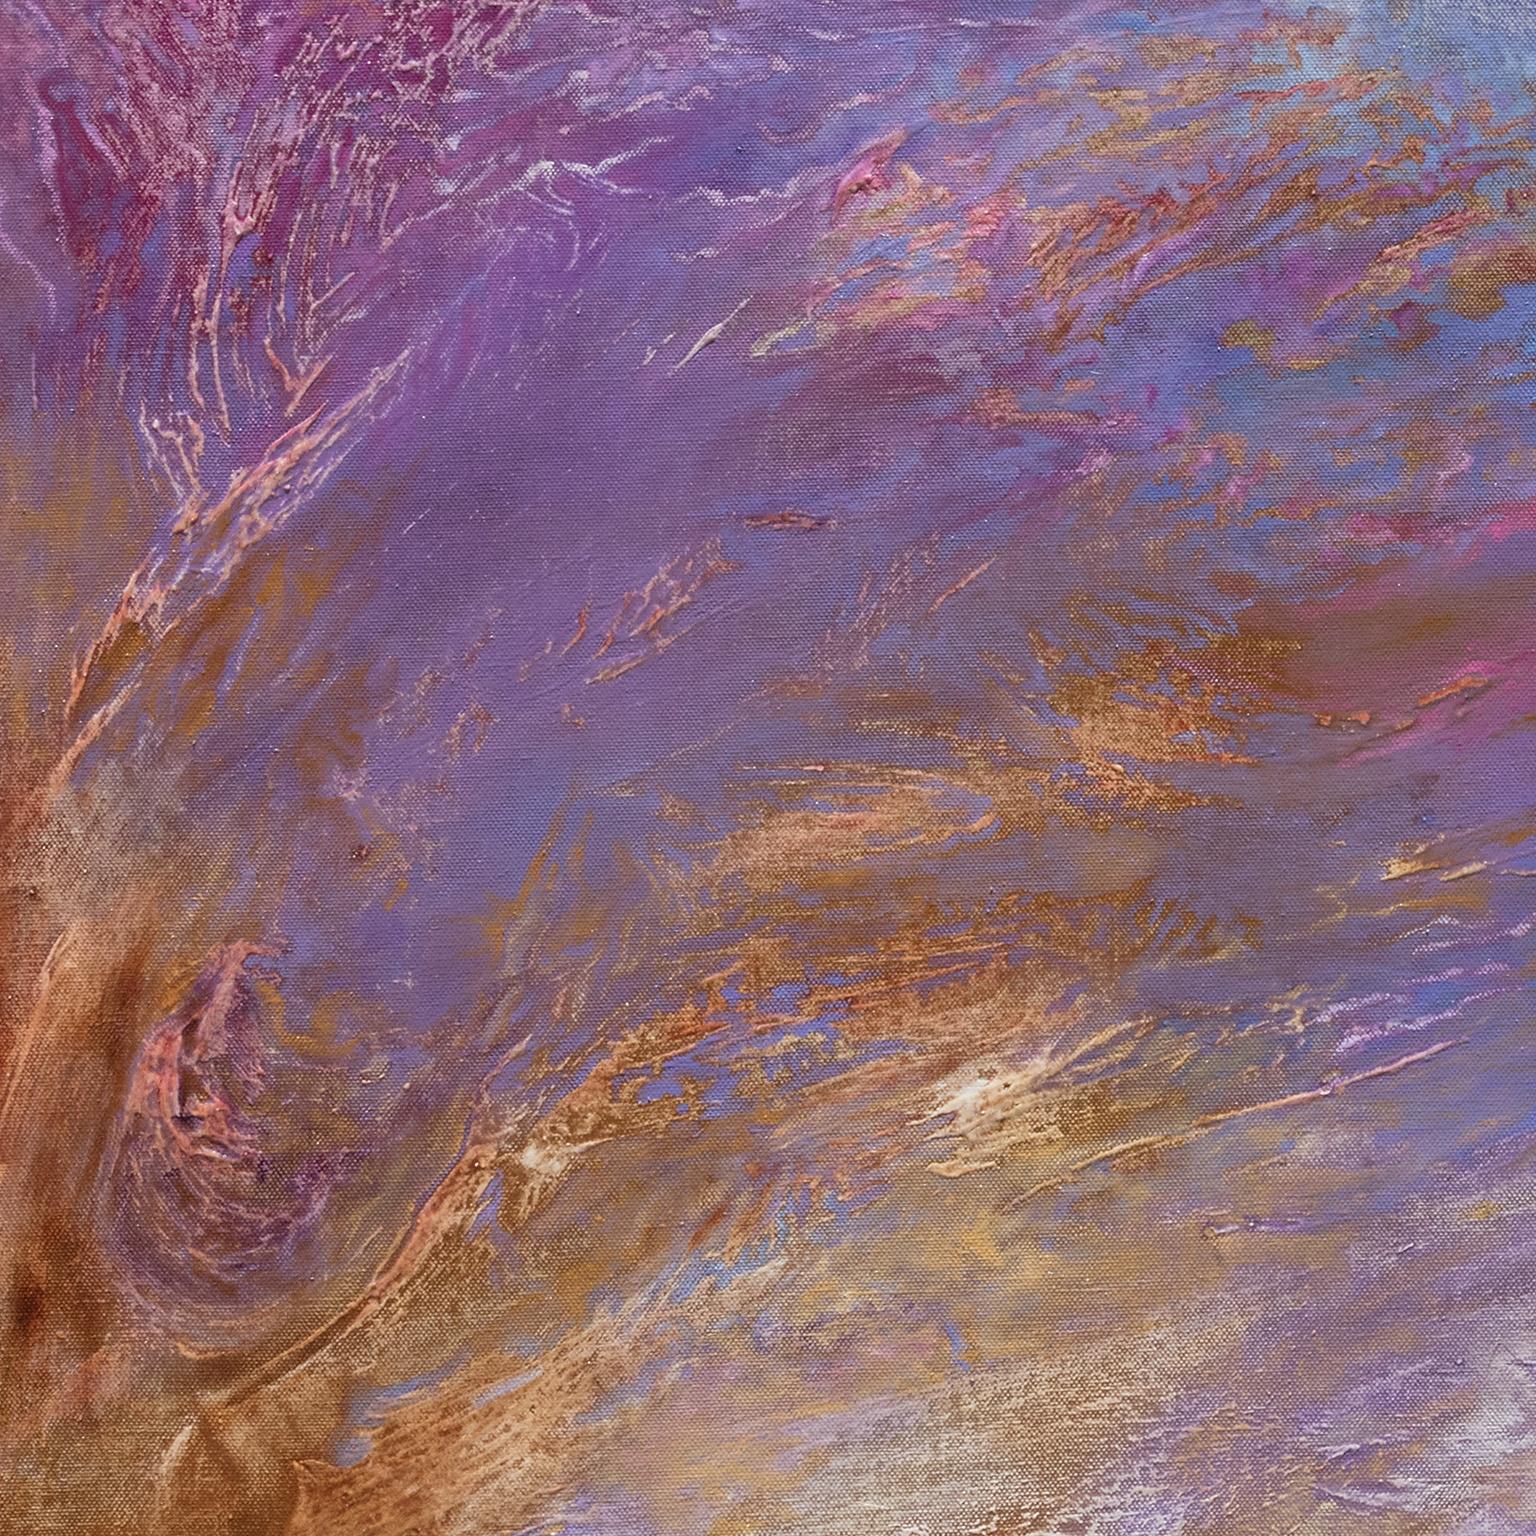 Ver Vernat (Spring Swirls) - Abstract Purple Painting with Reference to Nature 2